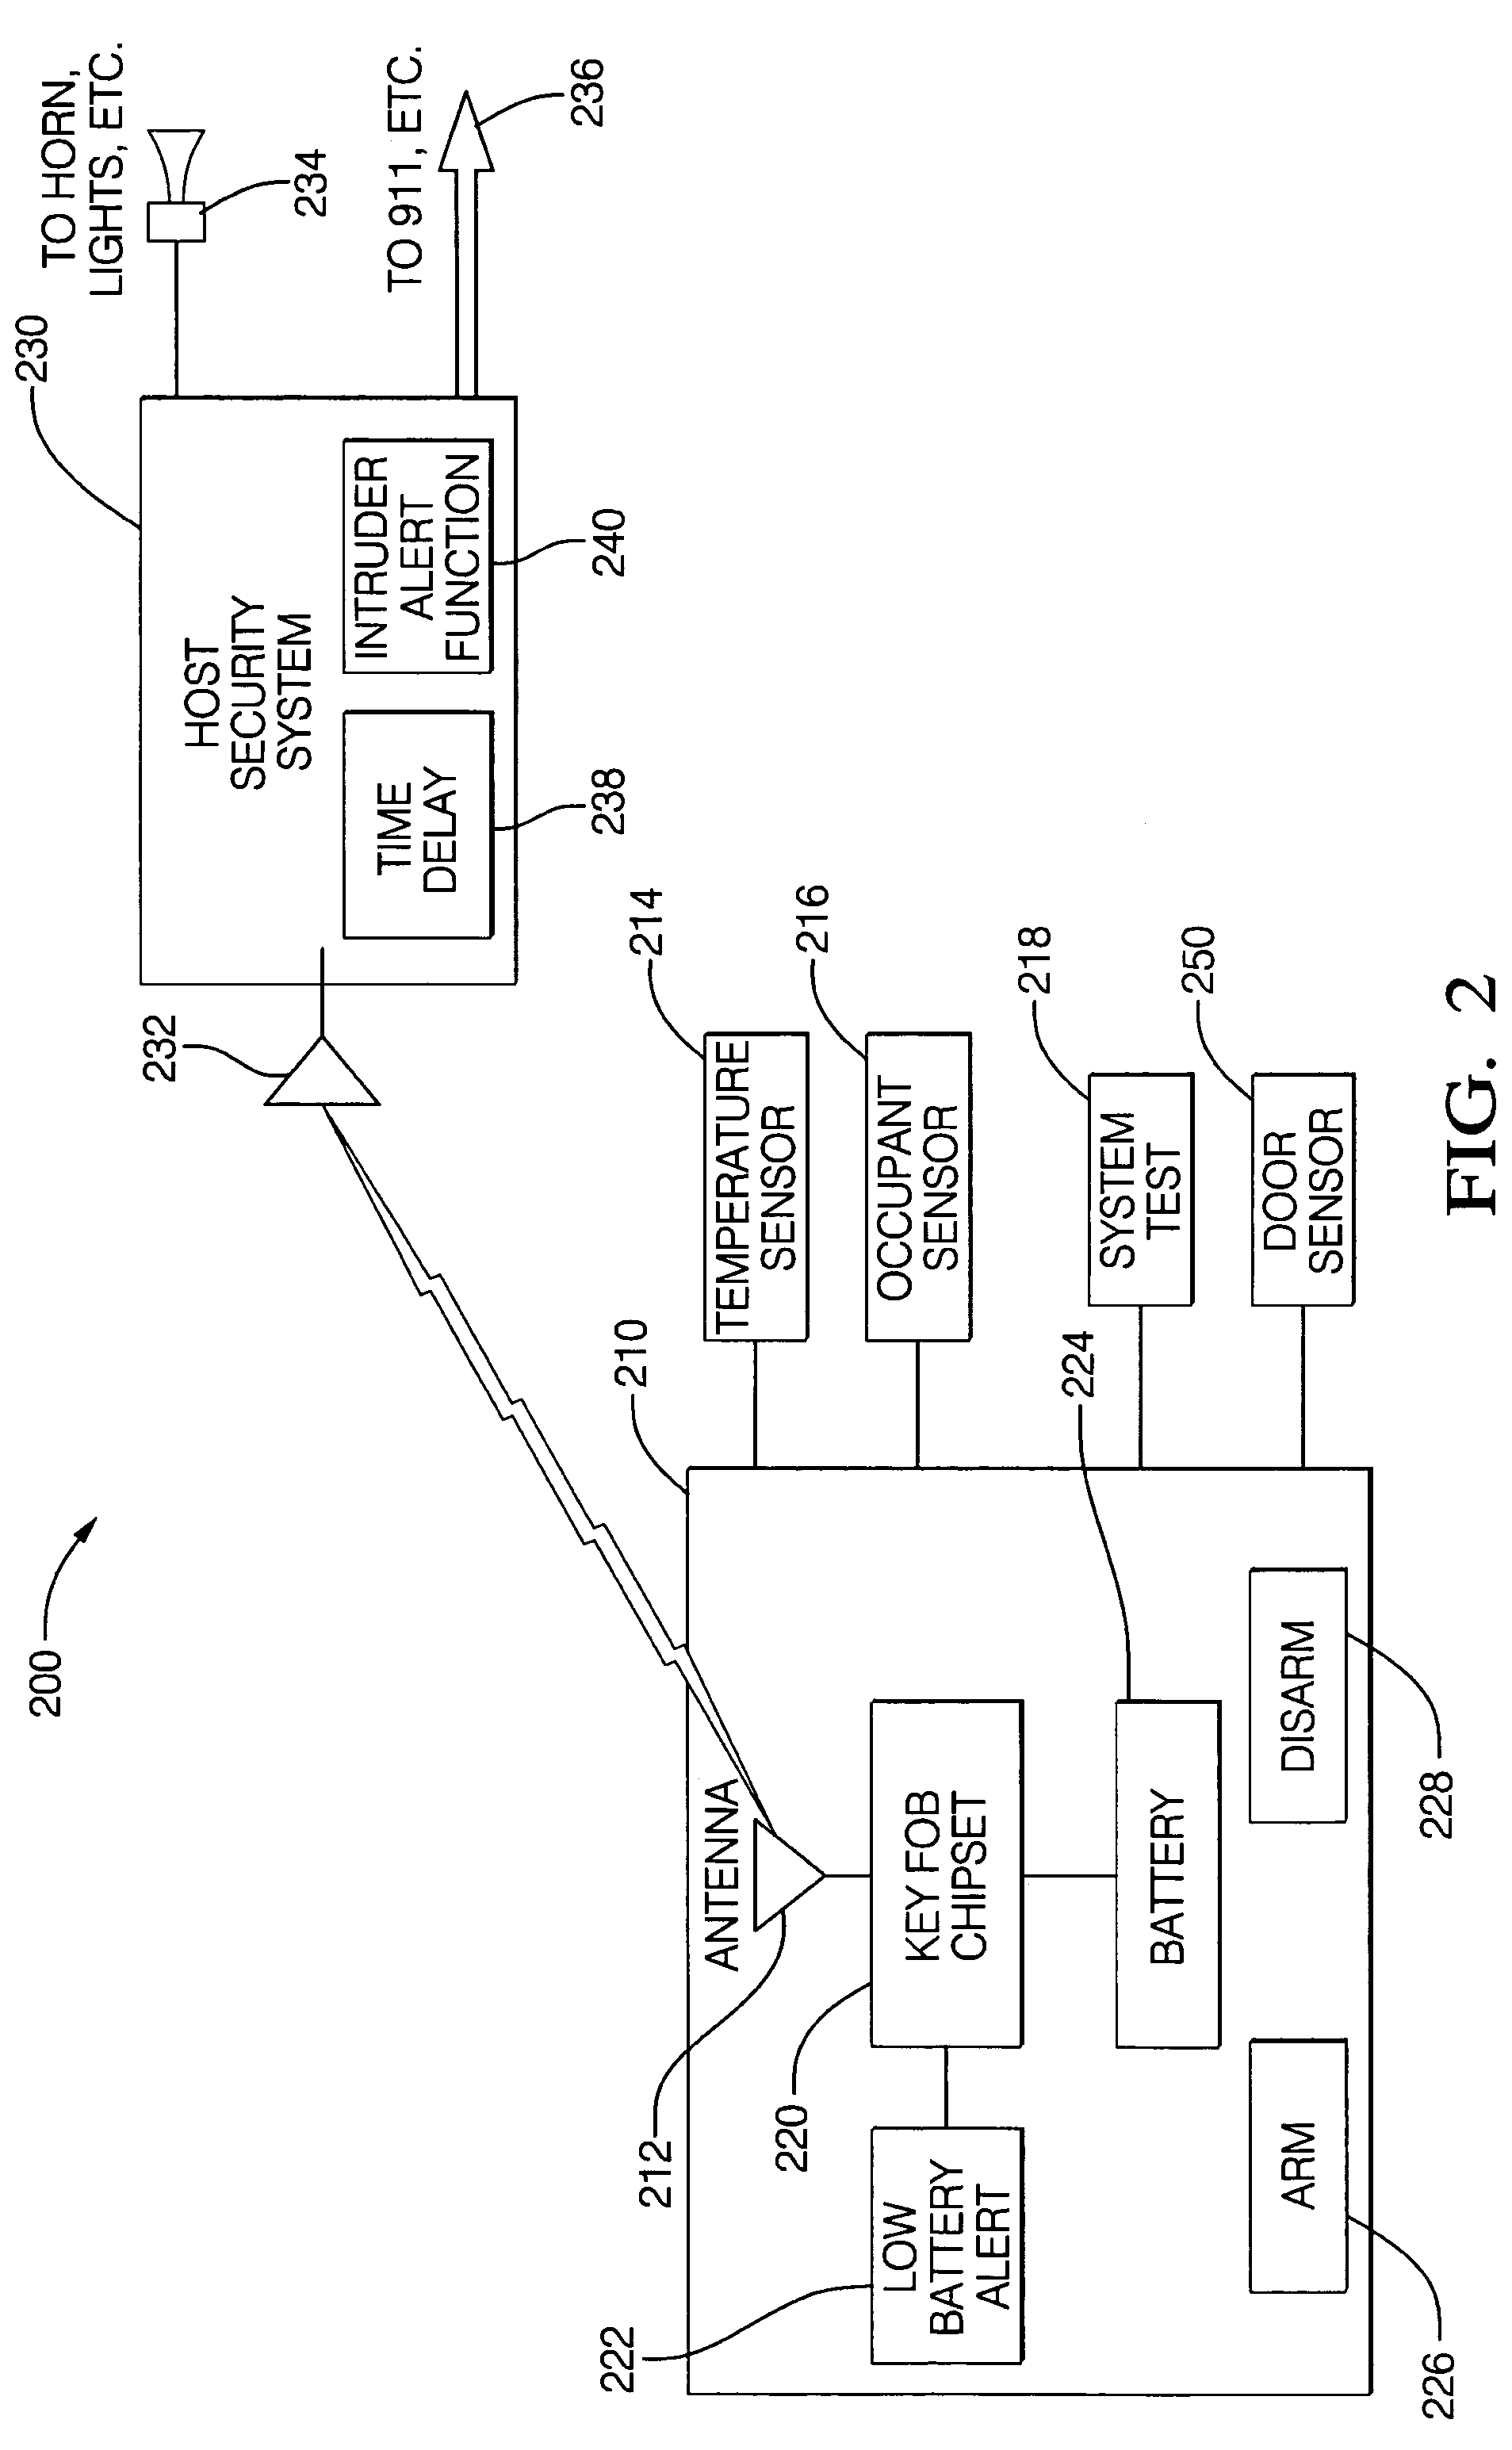 Occupant detection and temperature forewarn safety system and method